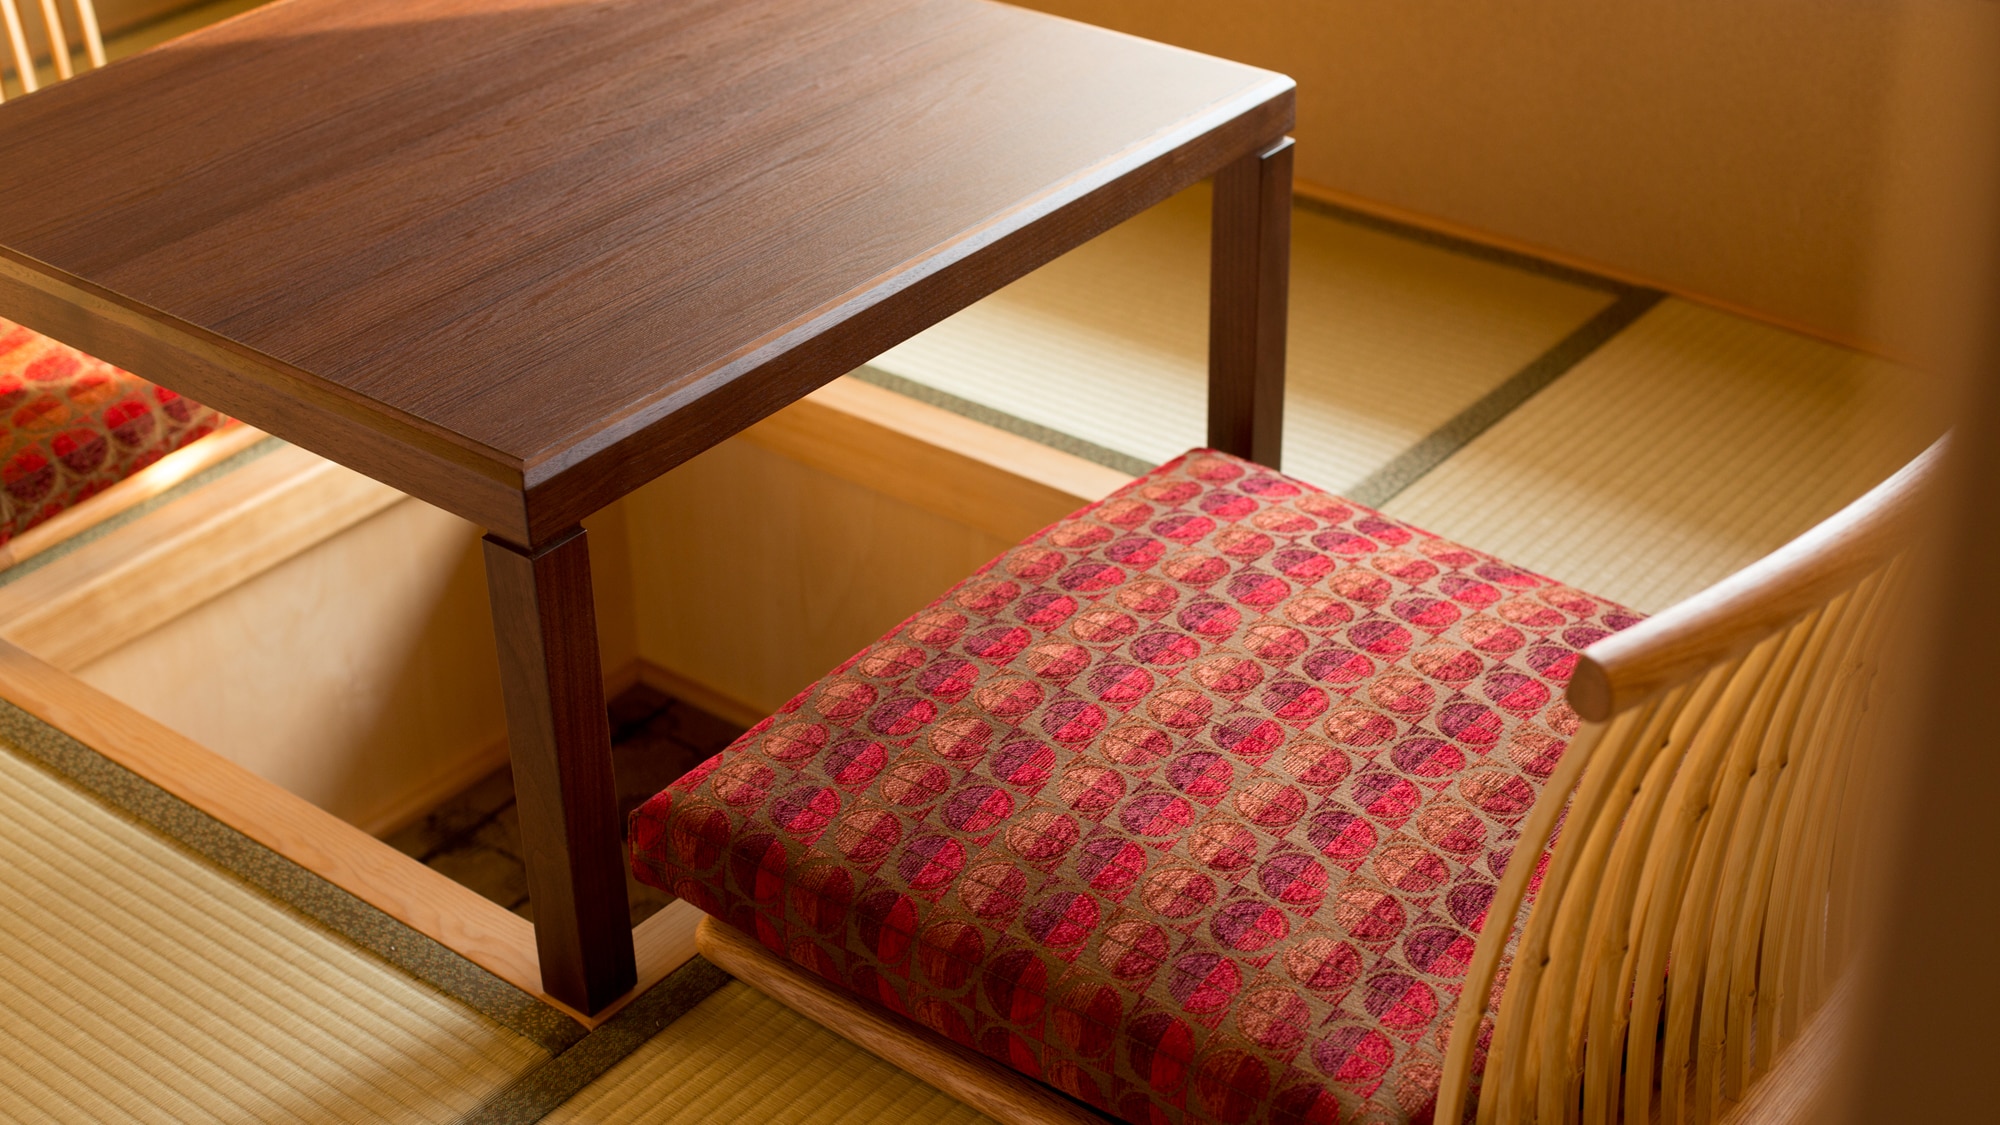 Superior twin (with digging kotatsu) 35 square meters (example)